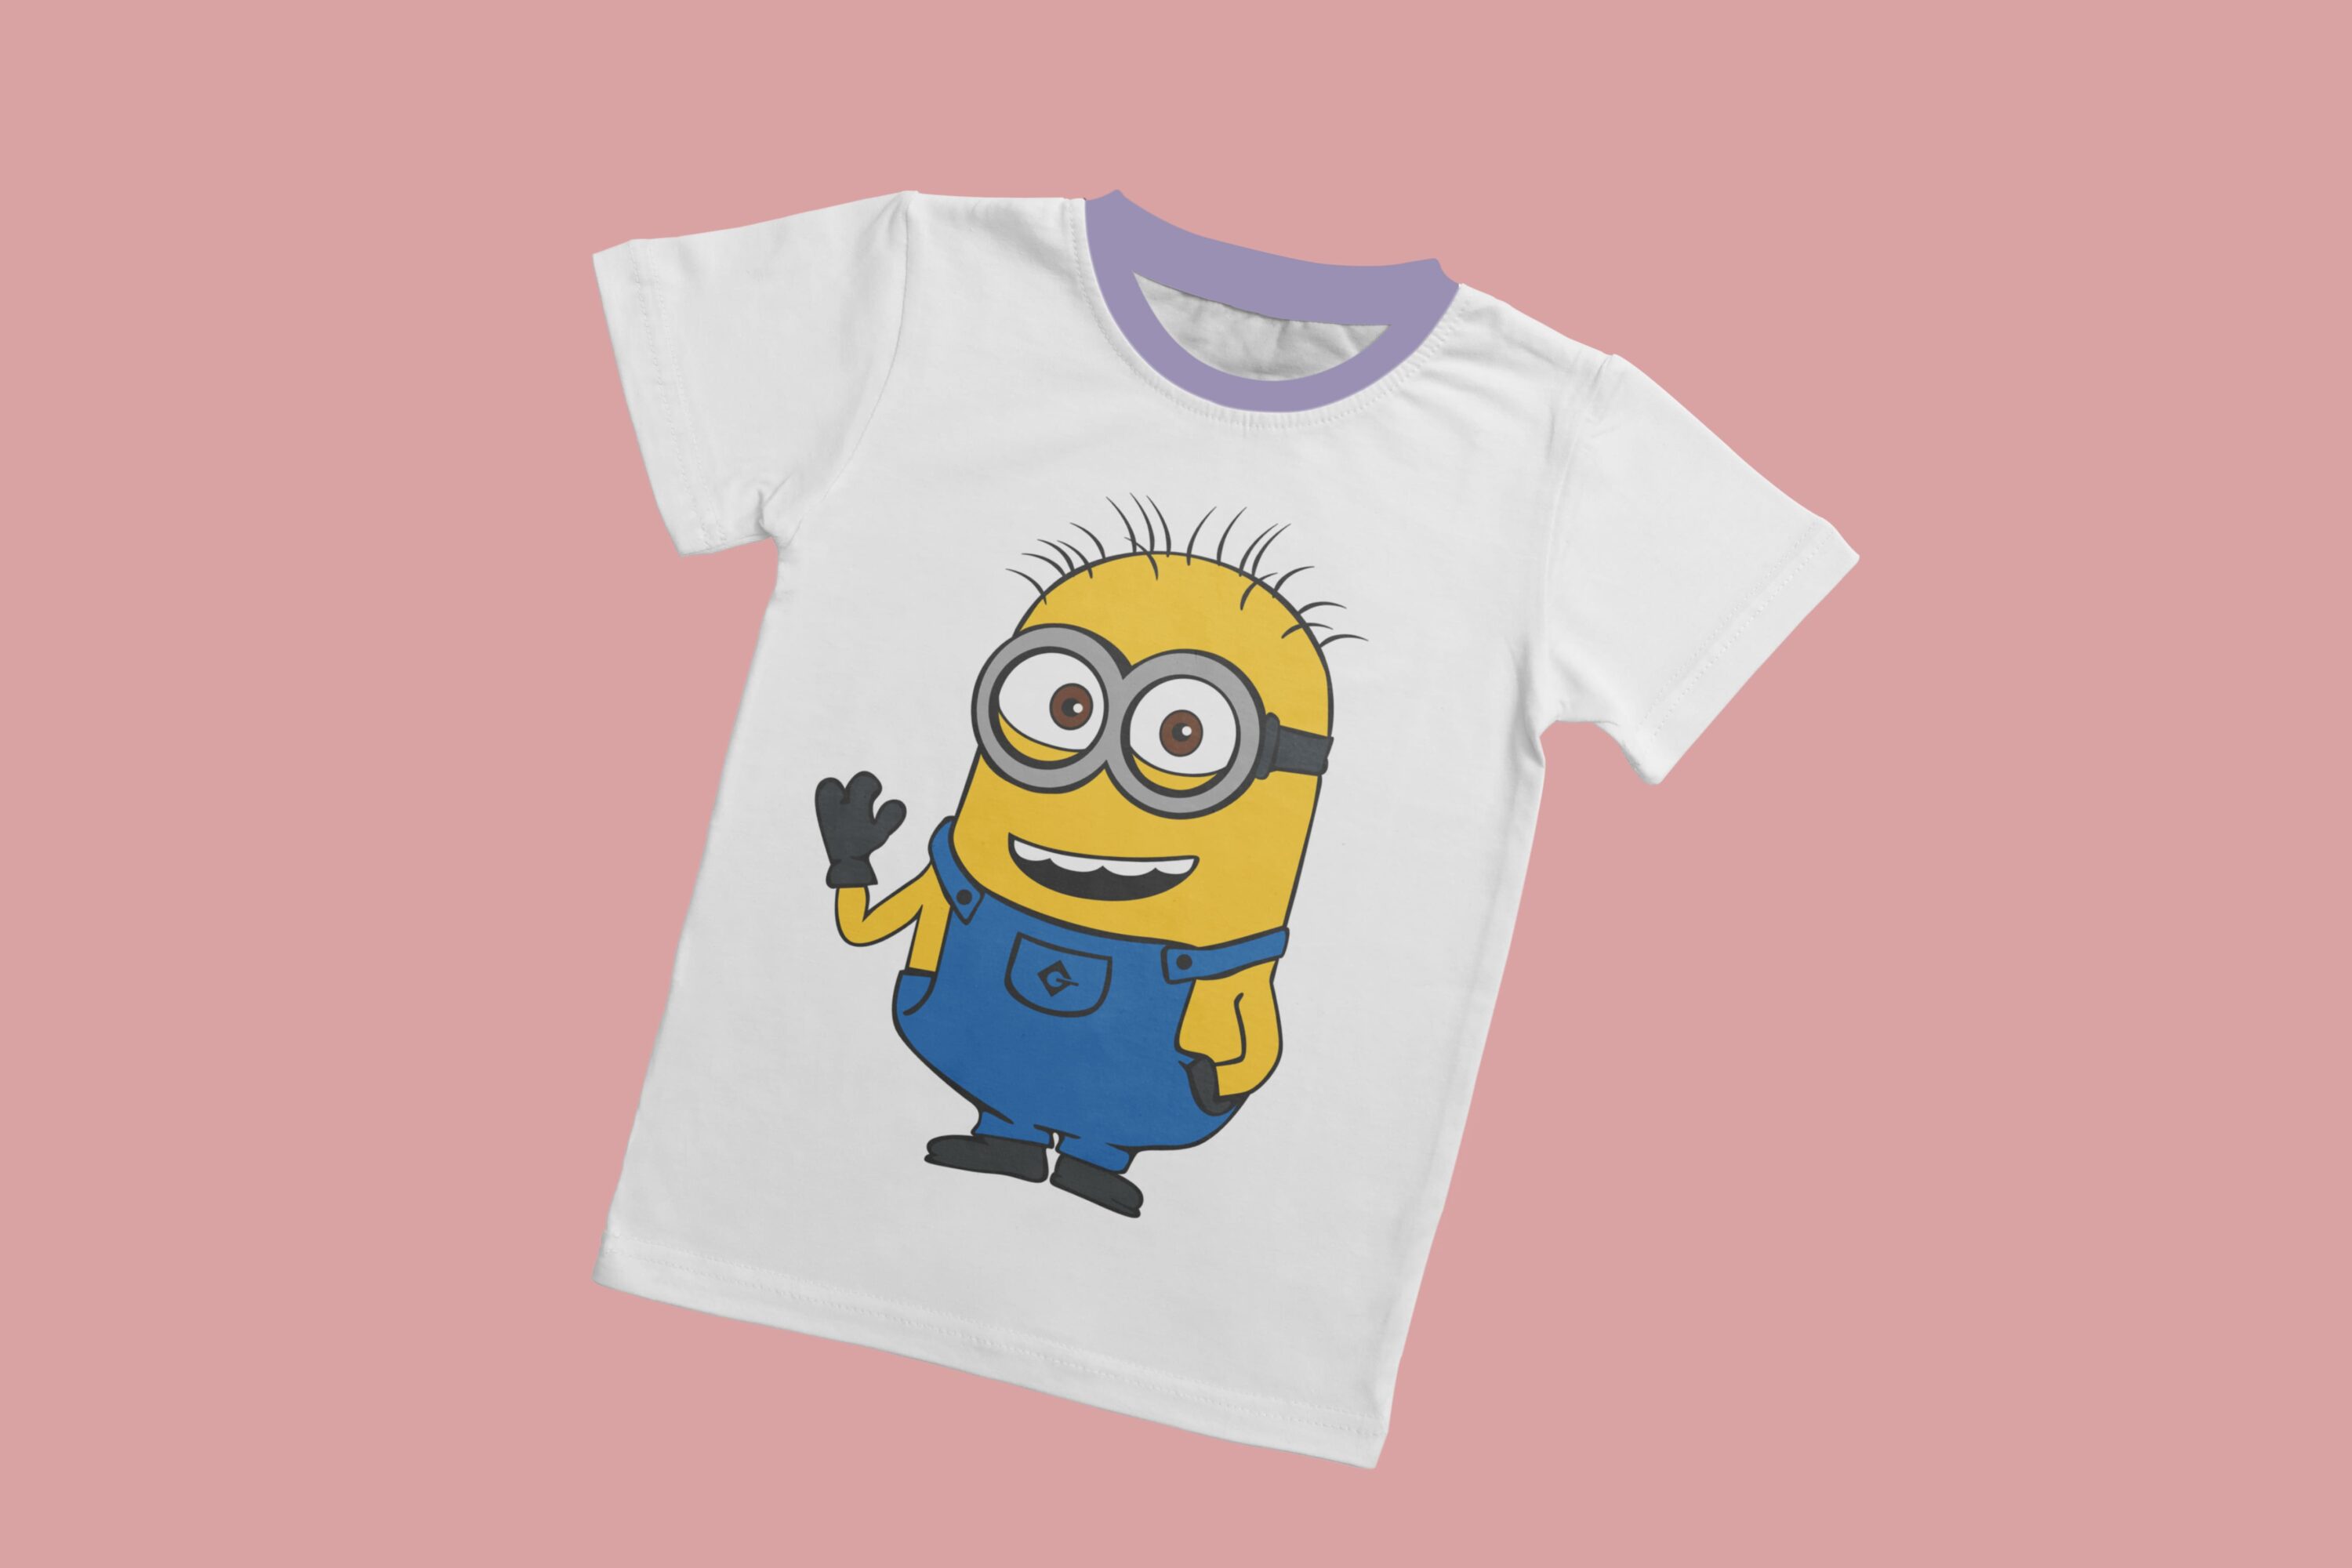 A white T-shirt with a lavender collar and a smiling minion.